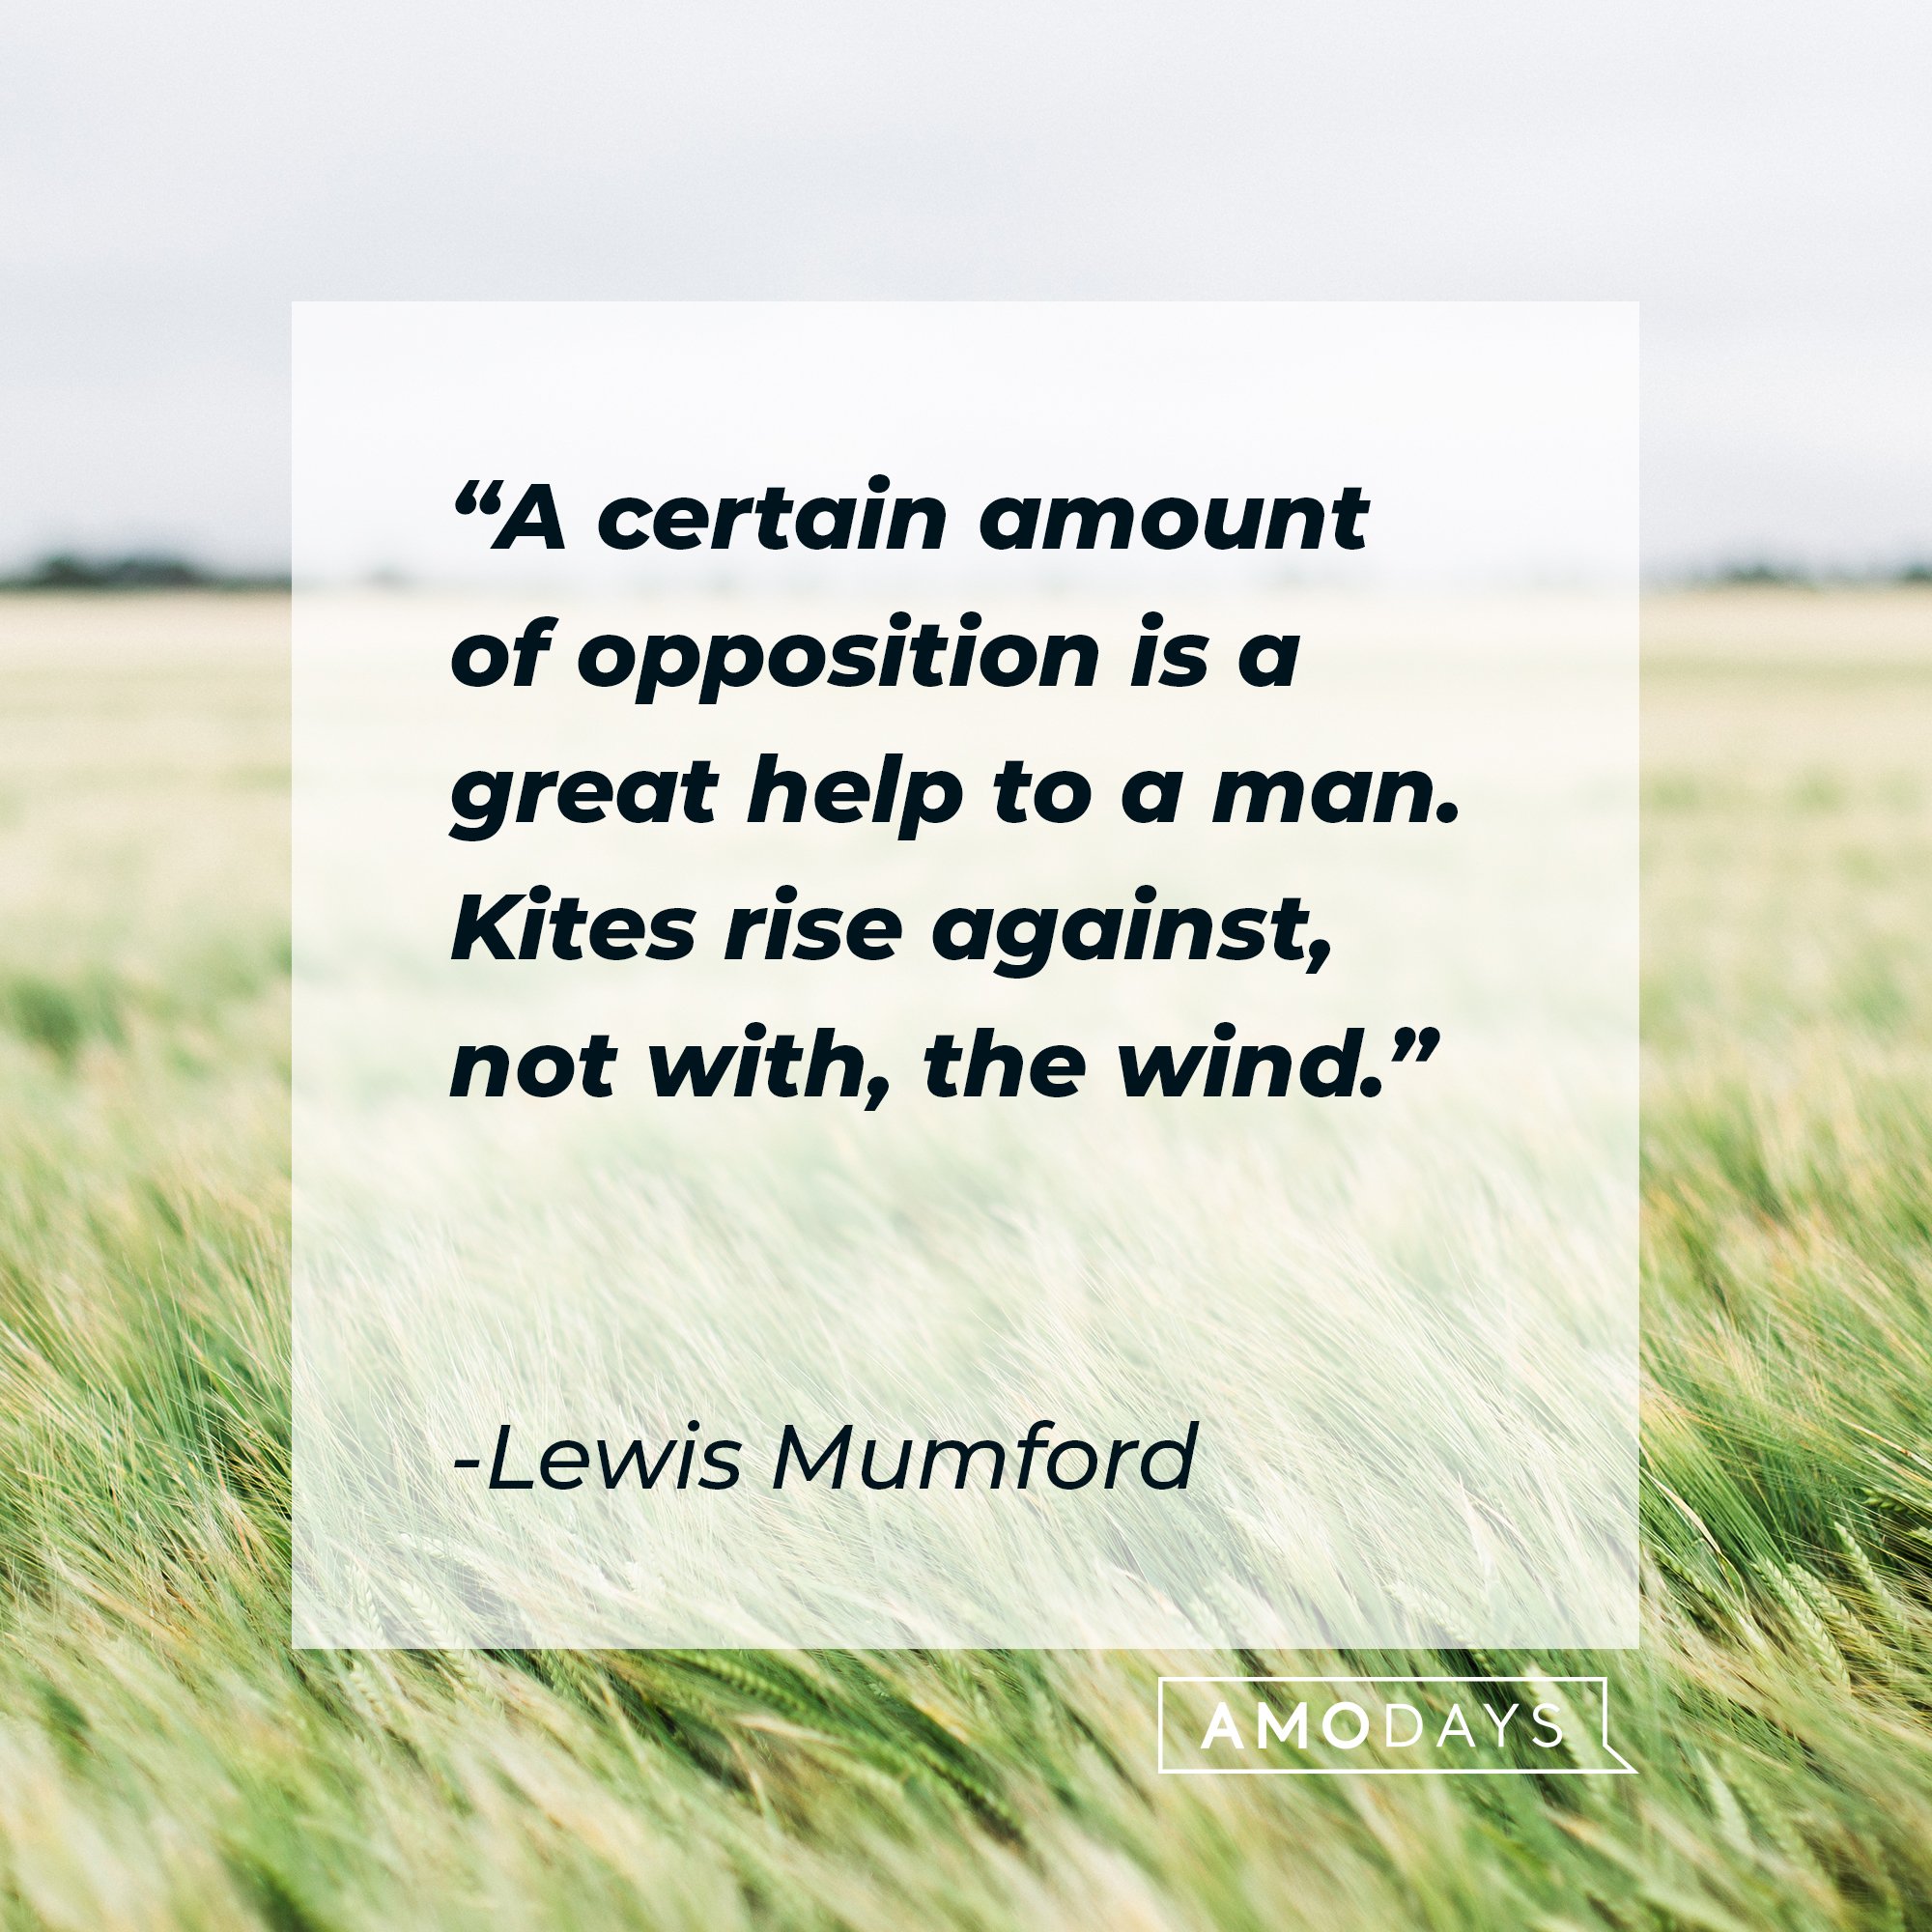 Lewis Mumford's quote: "A certain amount of opposition is a great help to a man. Kites rise against, not with, the wind." | Image: AmoDays